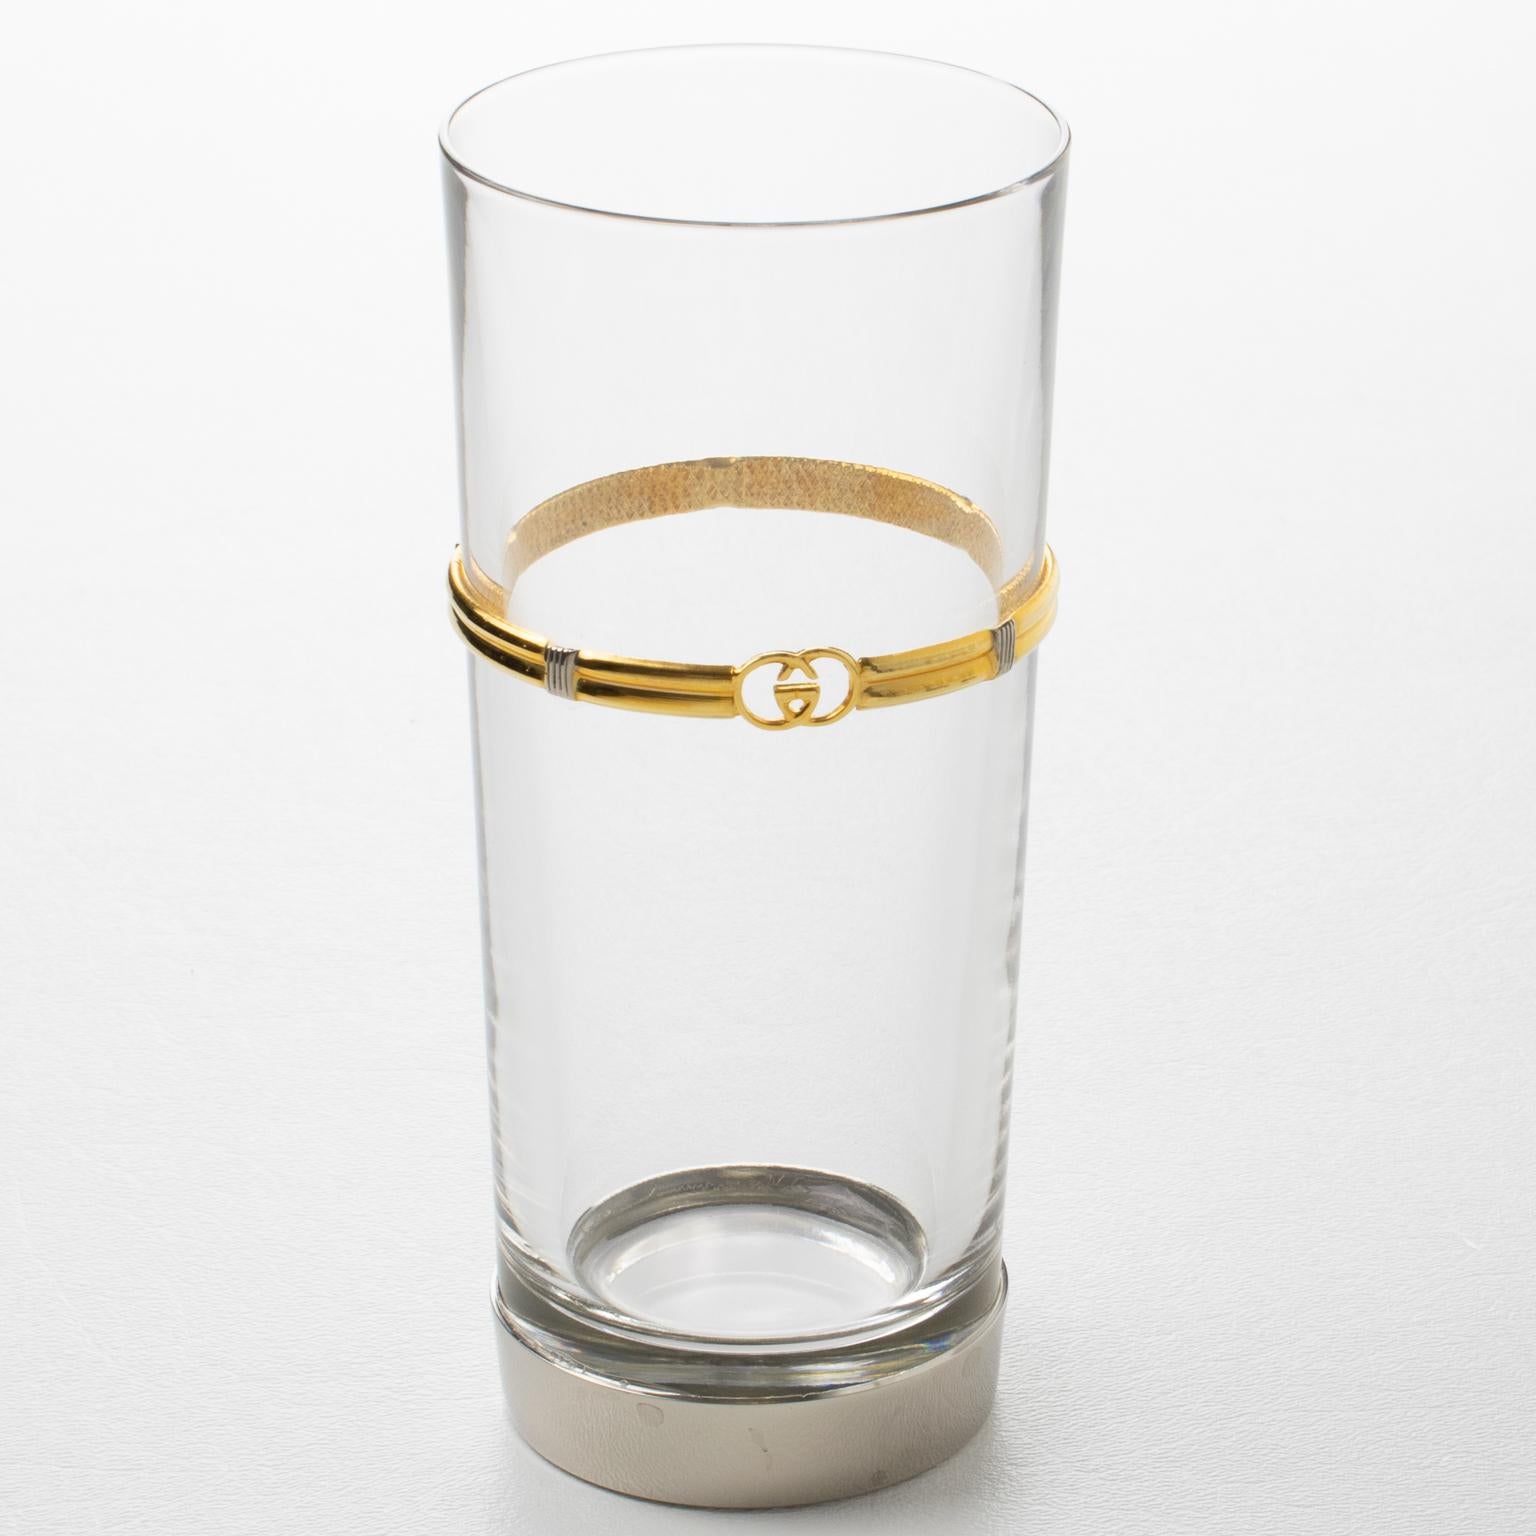 Italian Gucci Italy Barware Set Silver Plate and Crystal HighBall Tumbler Glasses, 5 pc For Sale